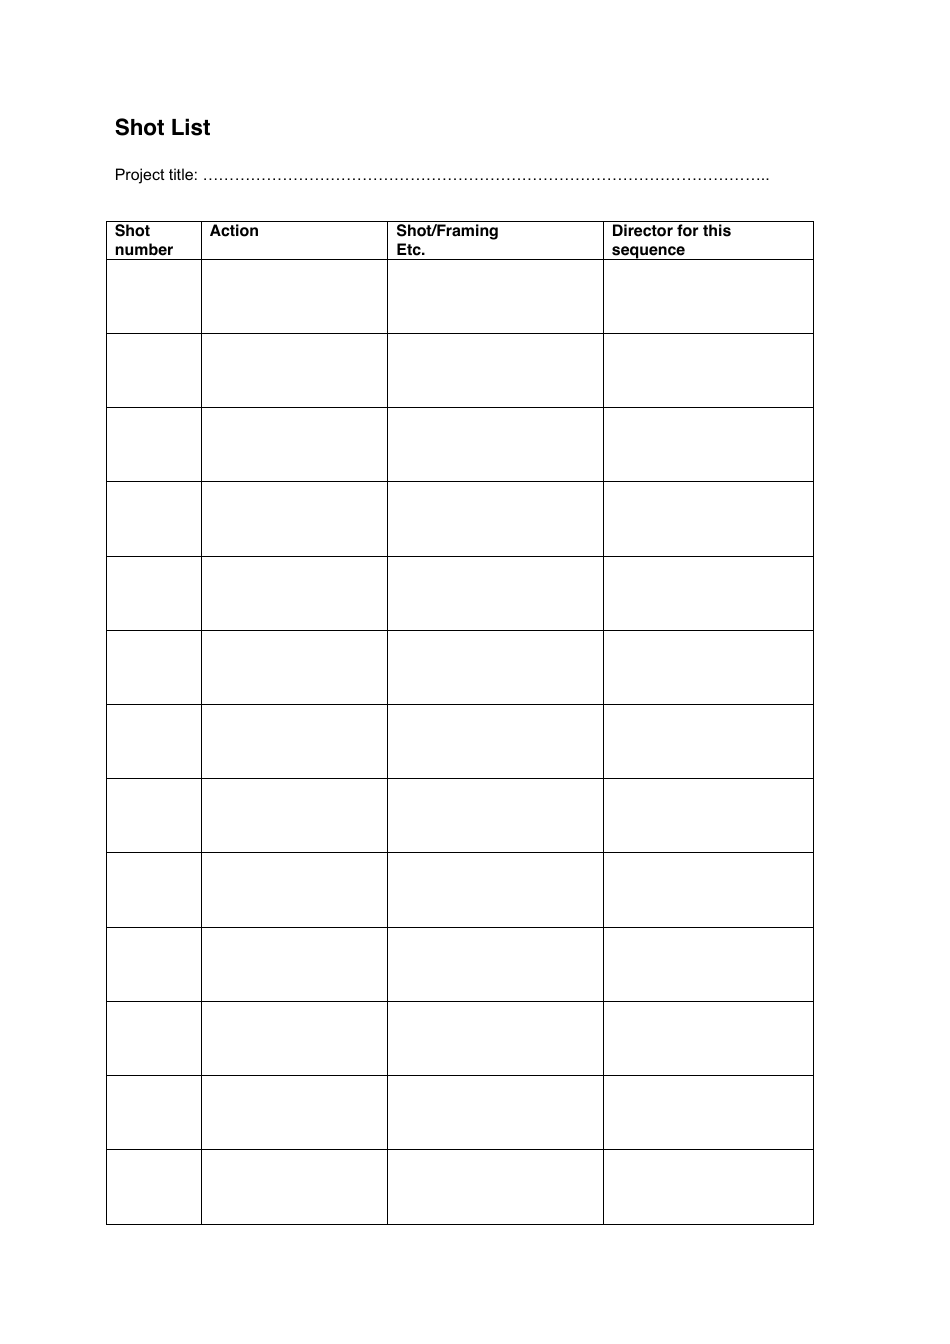 Shot List Template, Page 1